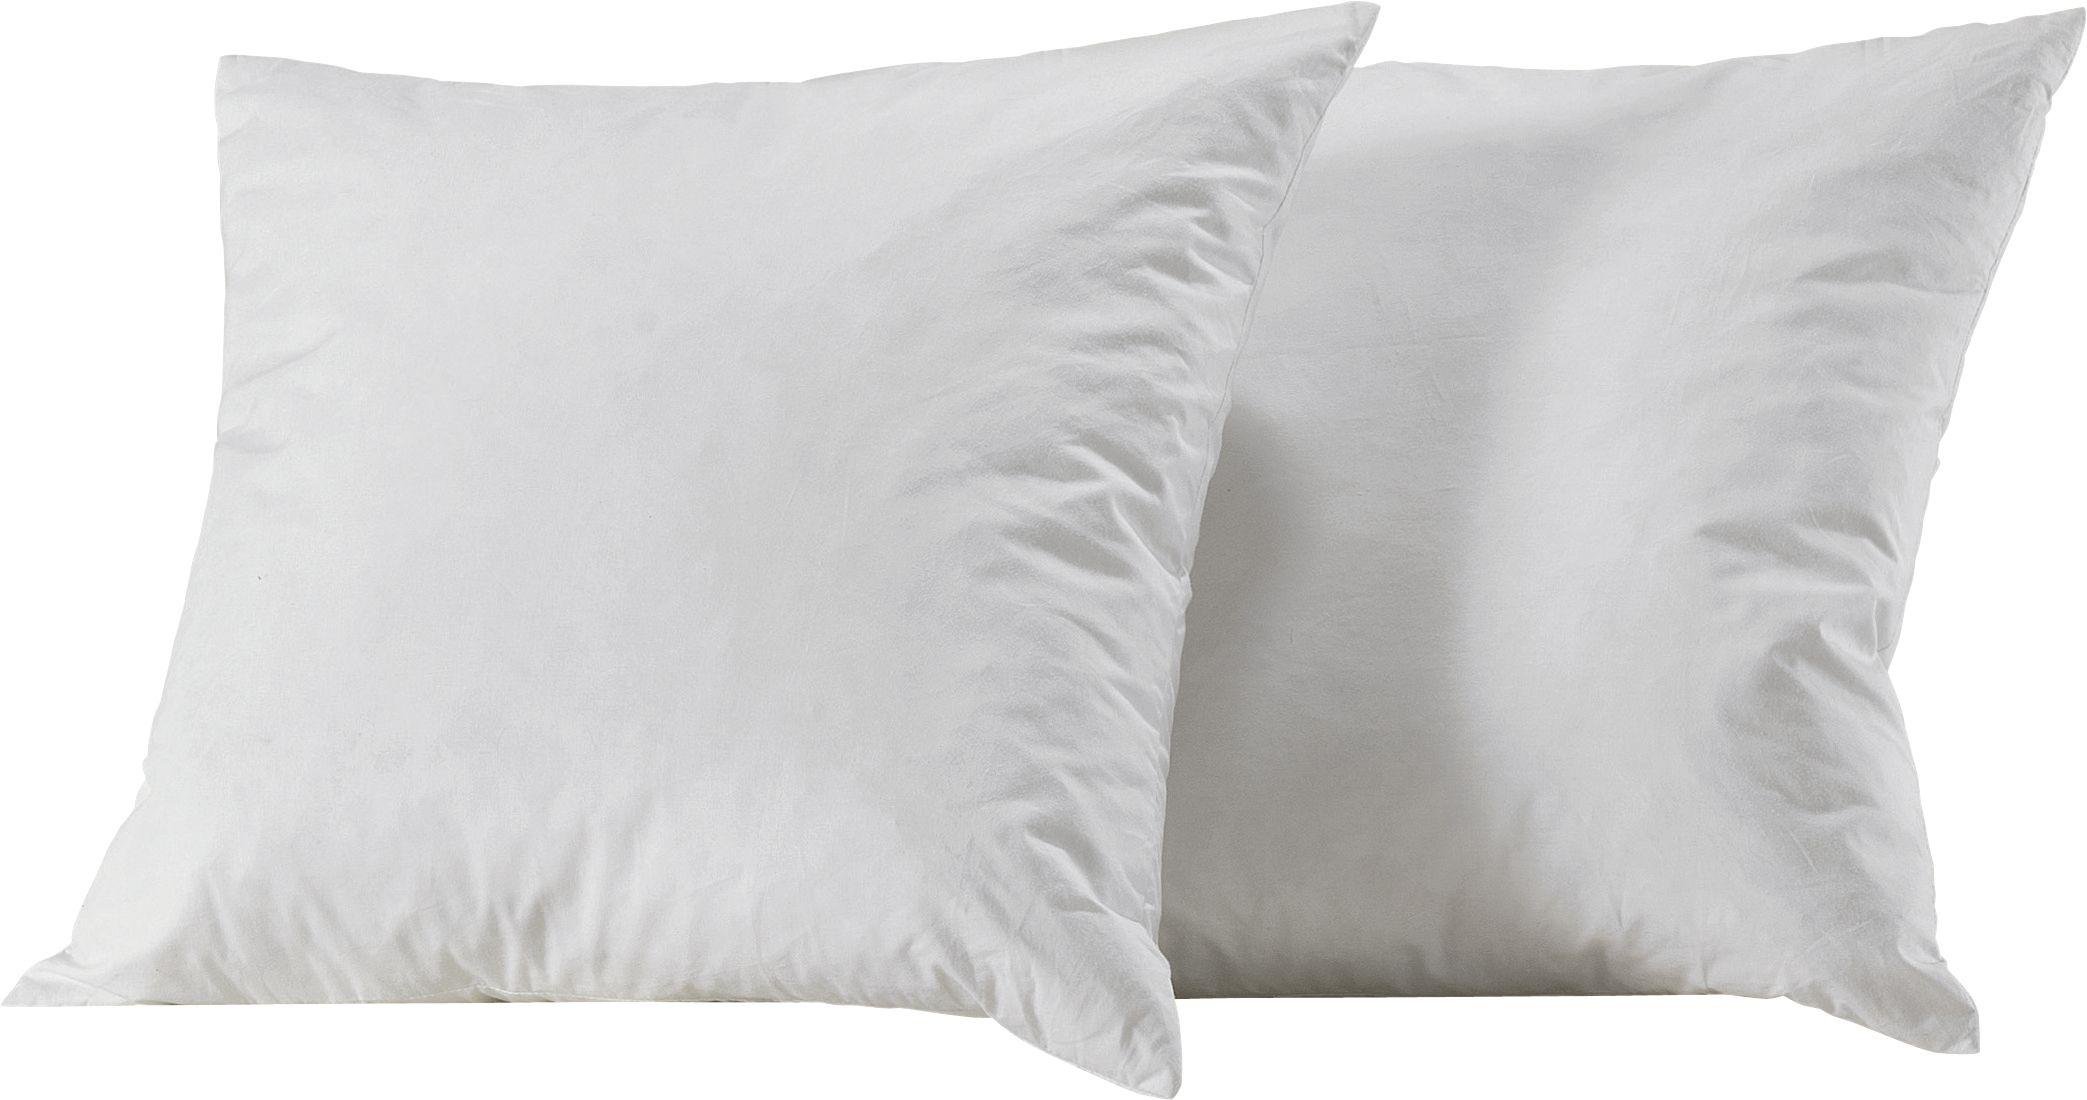 Argos Home Pack of 2 Duck Feather Cushion Pads - 43x43cm